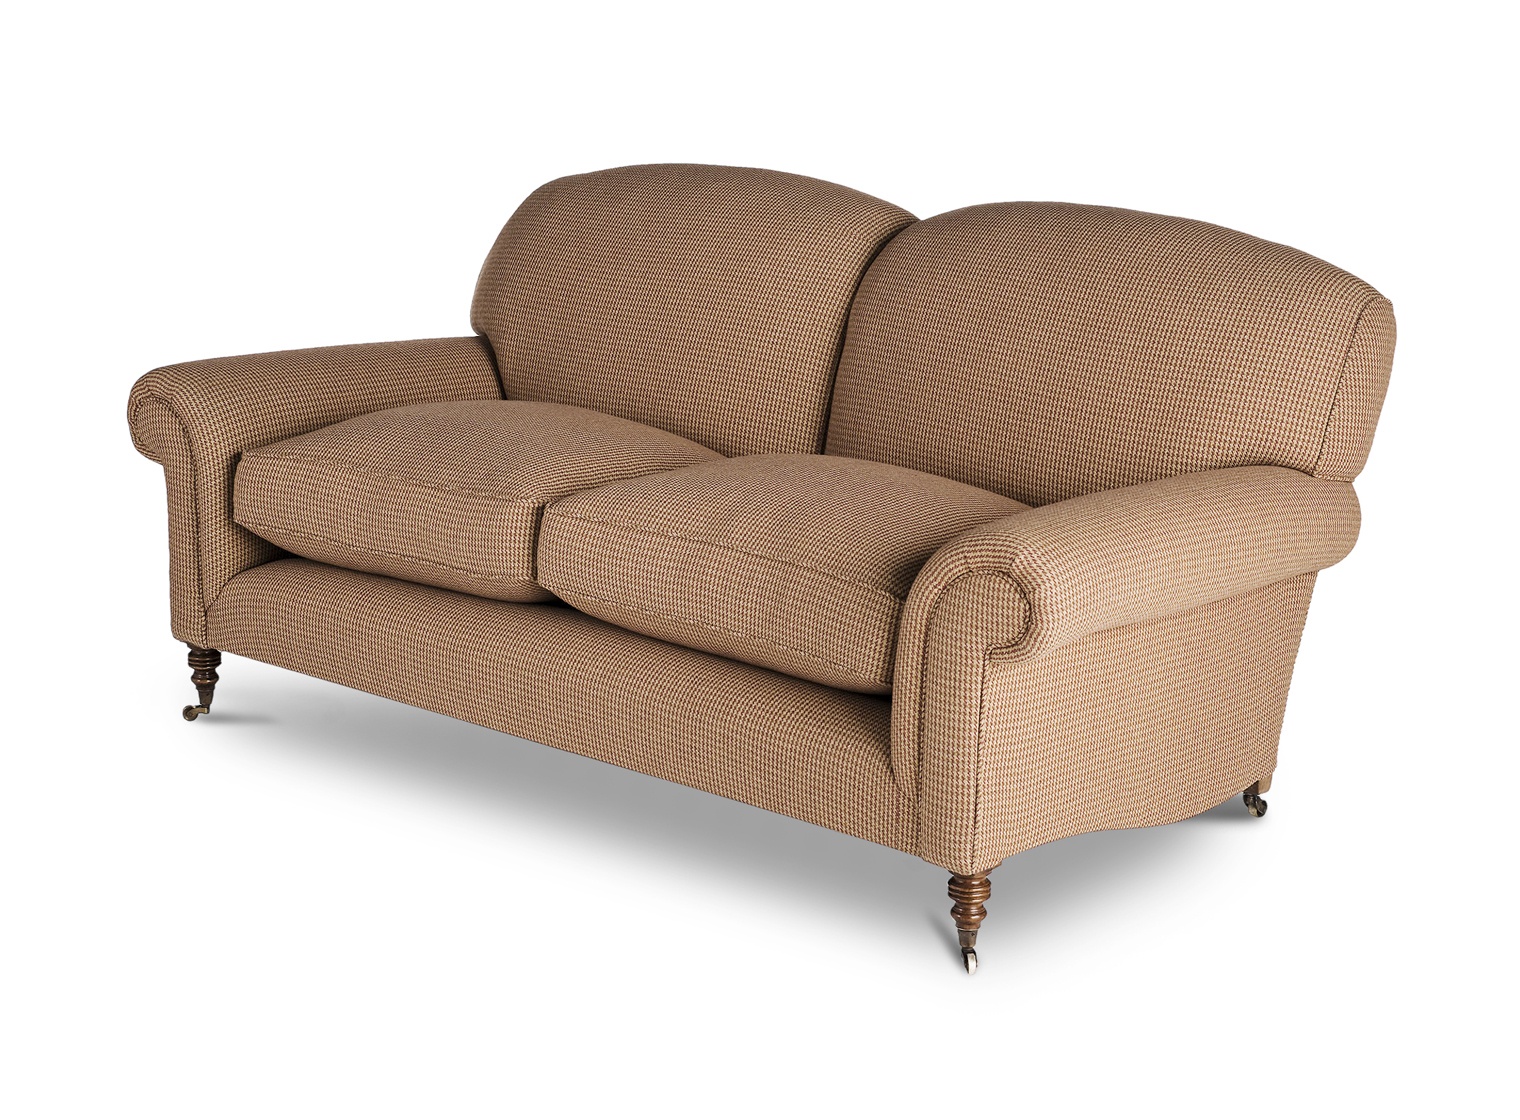 Bloomsbury 2.5 seater sofa in Argyll check - Ember red - Beaumont & Fletcher